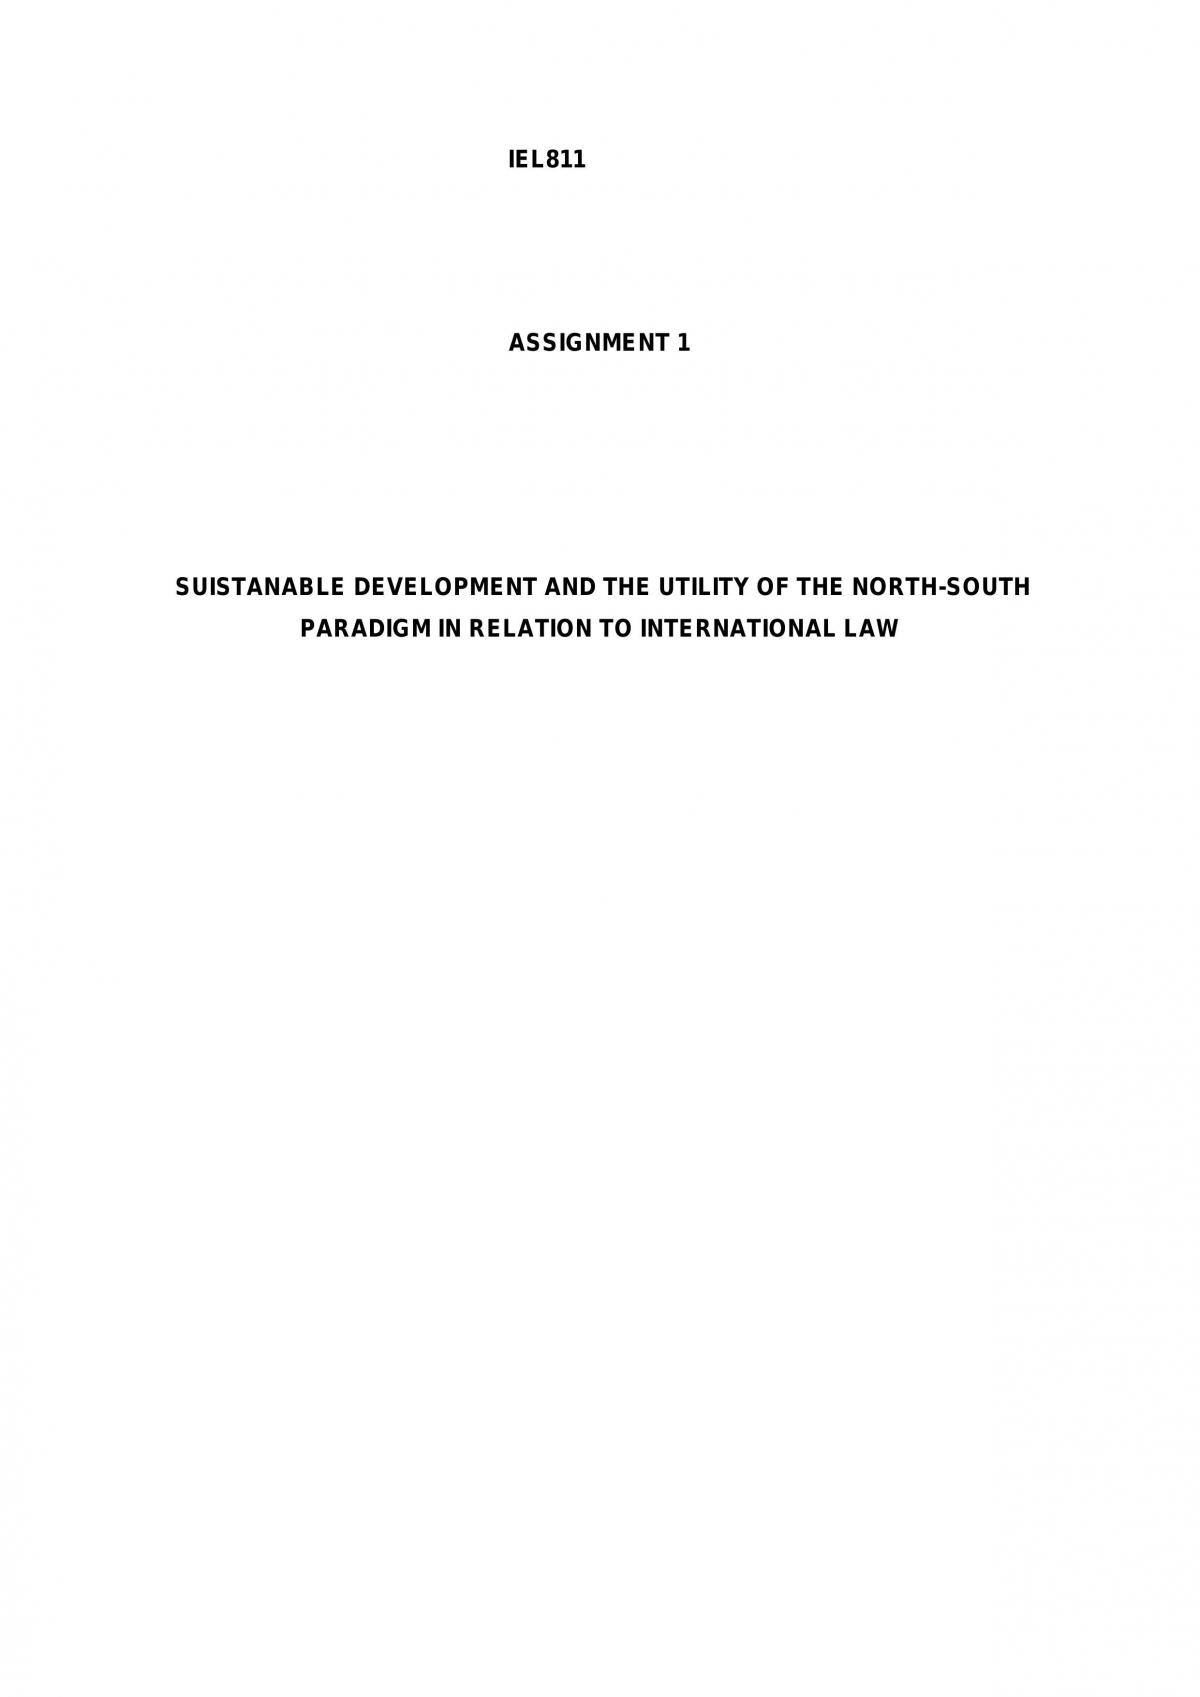 Review Of Sustainable Development And The Utility Of The North-South Paradigm In Relation To International Law - Page 1